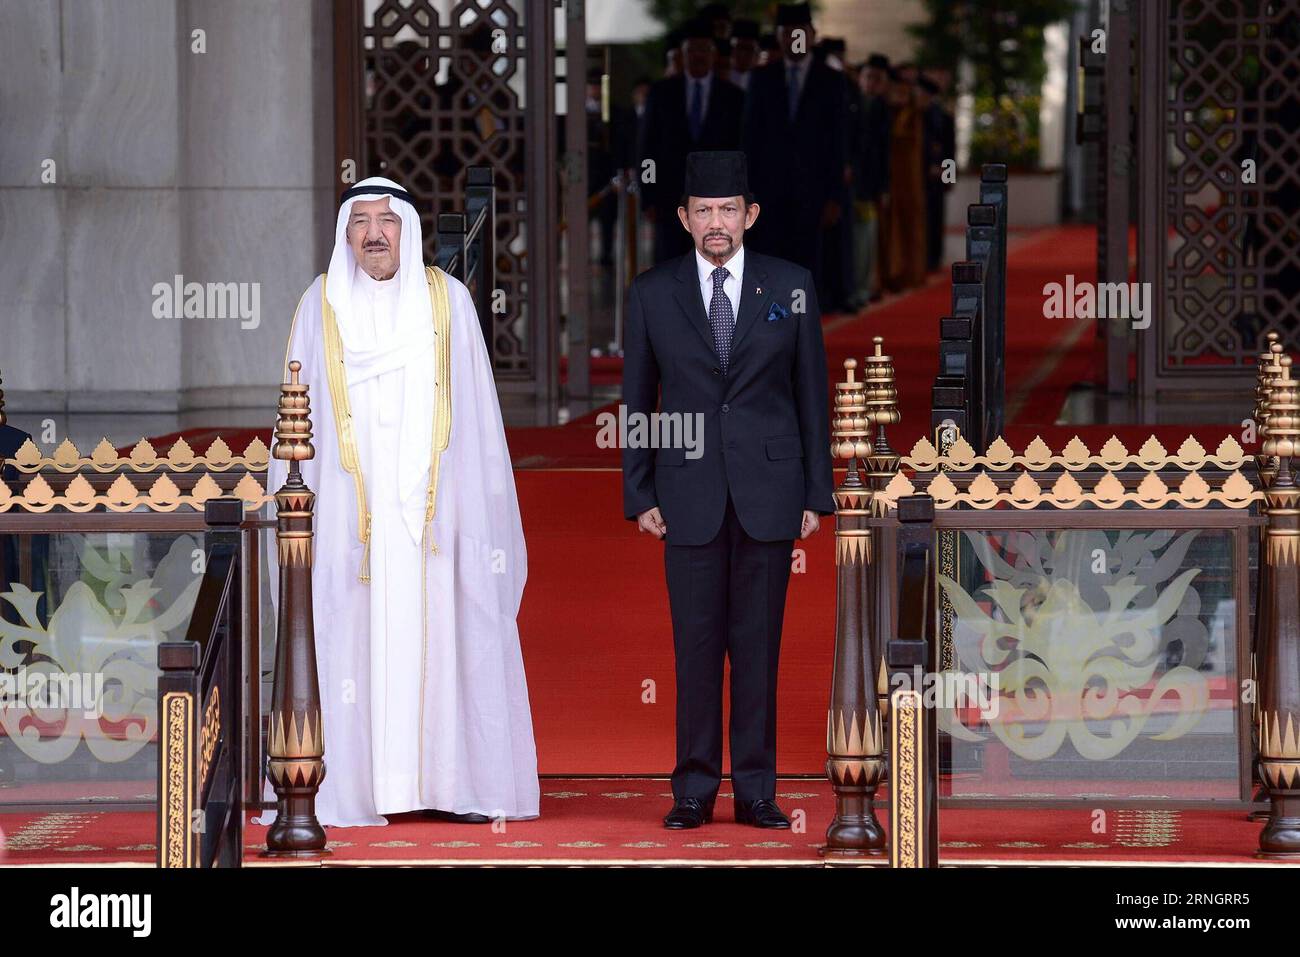 (161011) -- BANDAR SERI BEGAWAN, Oct. 11, 2016 -- The Emir of Kuwait Sheikh Sabah Al-Ahmad Al-Jaber Al-Sabah (L) is welcomed in a ceremony held by Brunei s Sultan Haji Hassanal Bolkiah at the Istana Nurul Iman palace in Bandar Seri Begawan, capital of Brunei, on Oct. 11, 2016. The Emir of Kuwait Sheikh Sabah Al-Ahmad Al-Jaber Al-Sabah touched down in Brunei Tuesday afternoon for his first state visit to the sultanate. ) (lr) BRUNEI-BANDAR SERI BEGAWAN-KUWAIT-EMIR-STATE VISIT JeffreyxWong PUBLICATIONxNOTxINxCHN Stock Photo